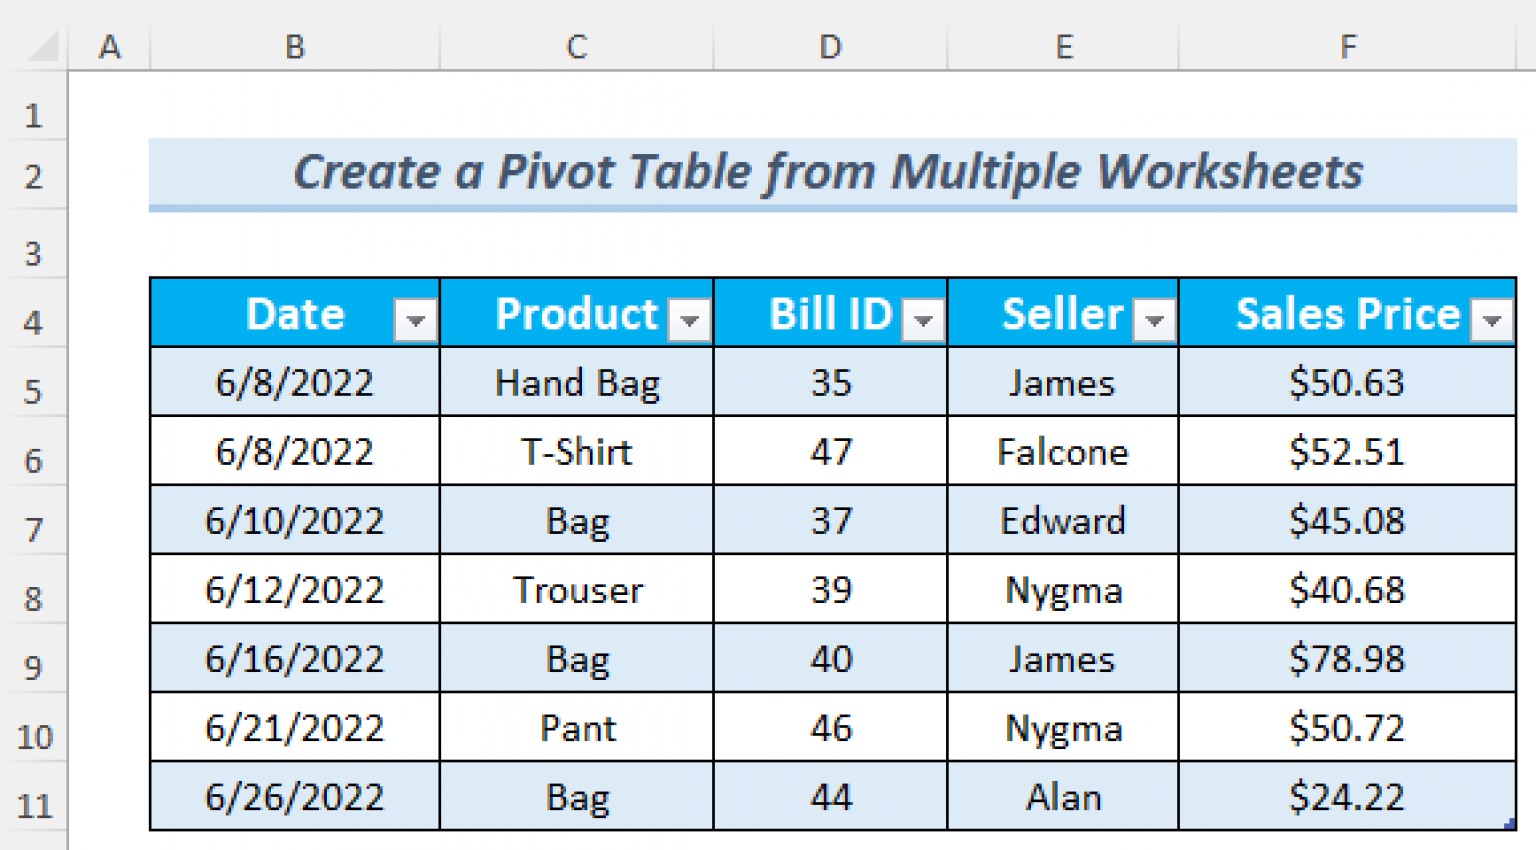 how-do-i-create-a-pivot-table-from-multiple-worksheets-2-ways